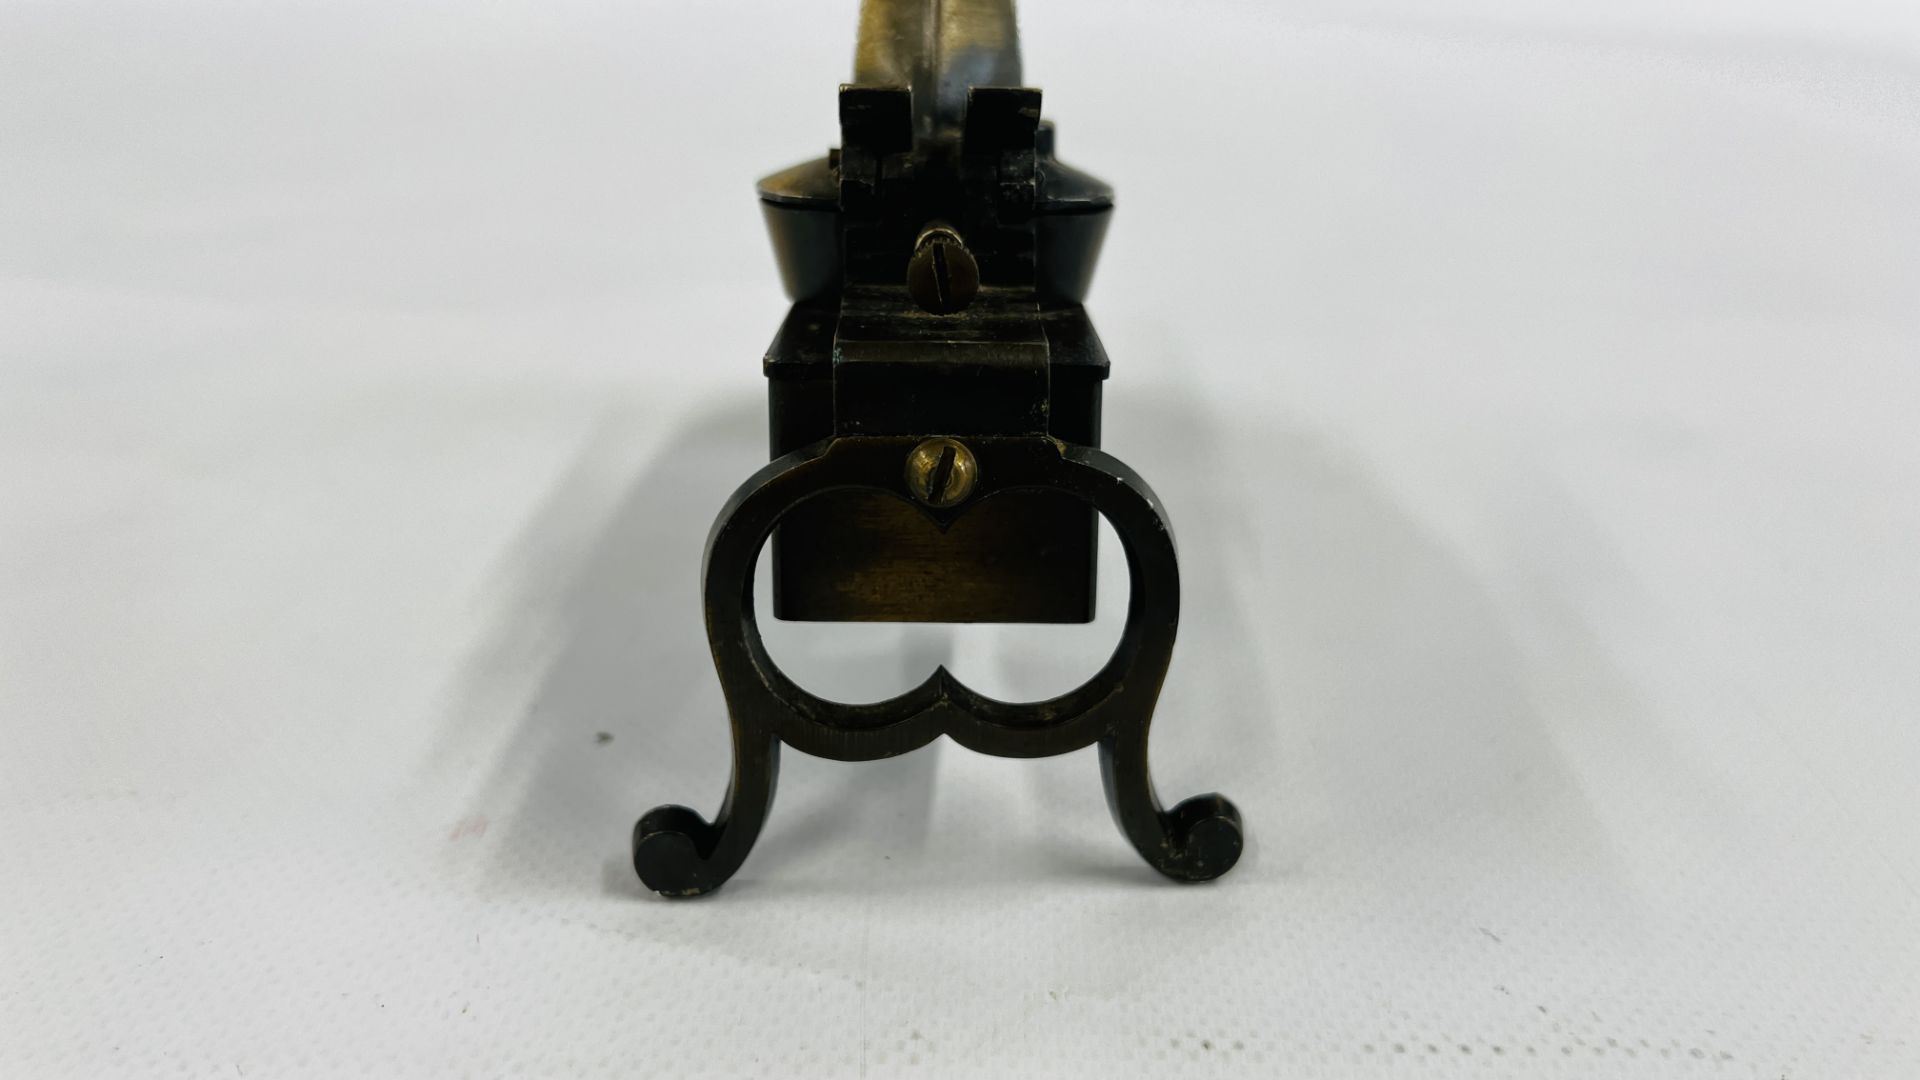 A VINTAGE DUNHILL TINDER PISTOL TABLE LIGHTER MADE IN ENGLAND USA PATENT NO. 592139 - L 14CM. - Image 6 of 14